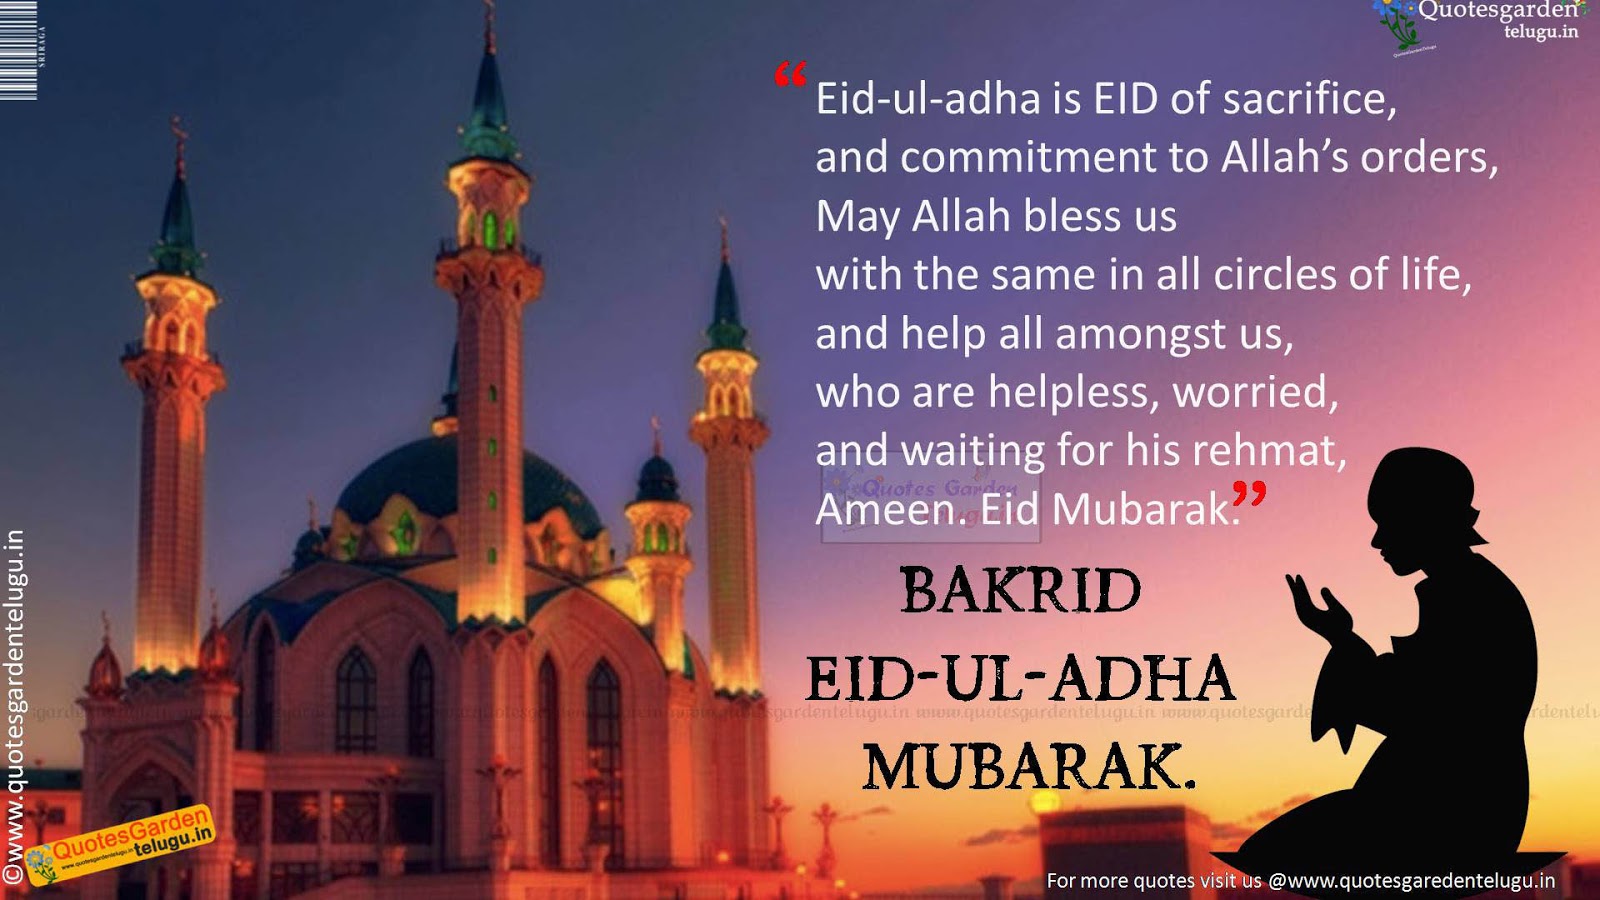 Bakrid eid mubarak quotes greetings wishes HD wallpapers images ...